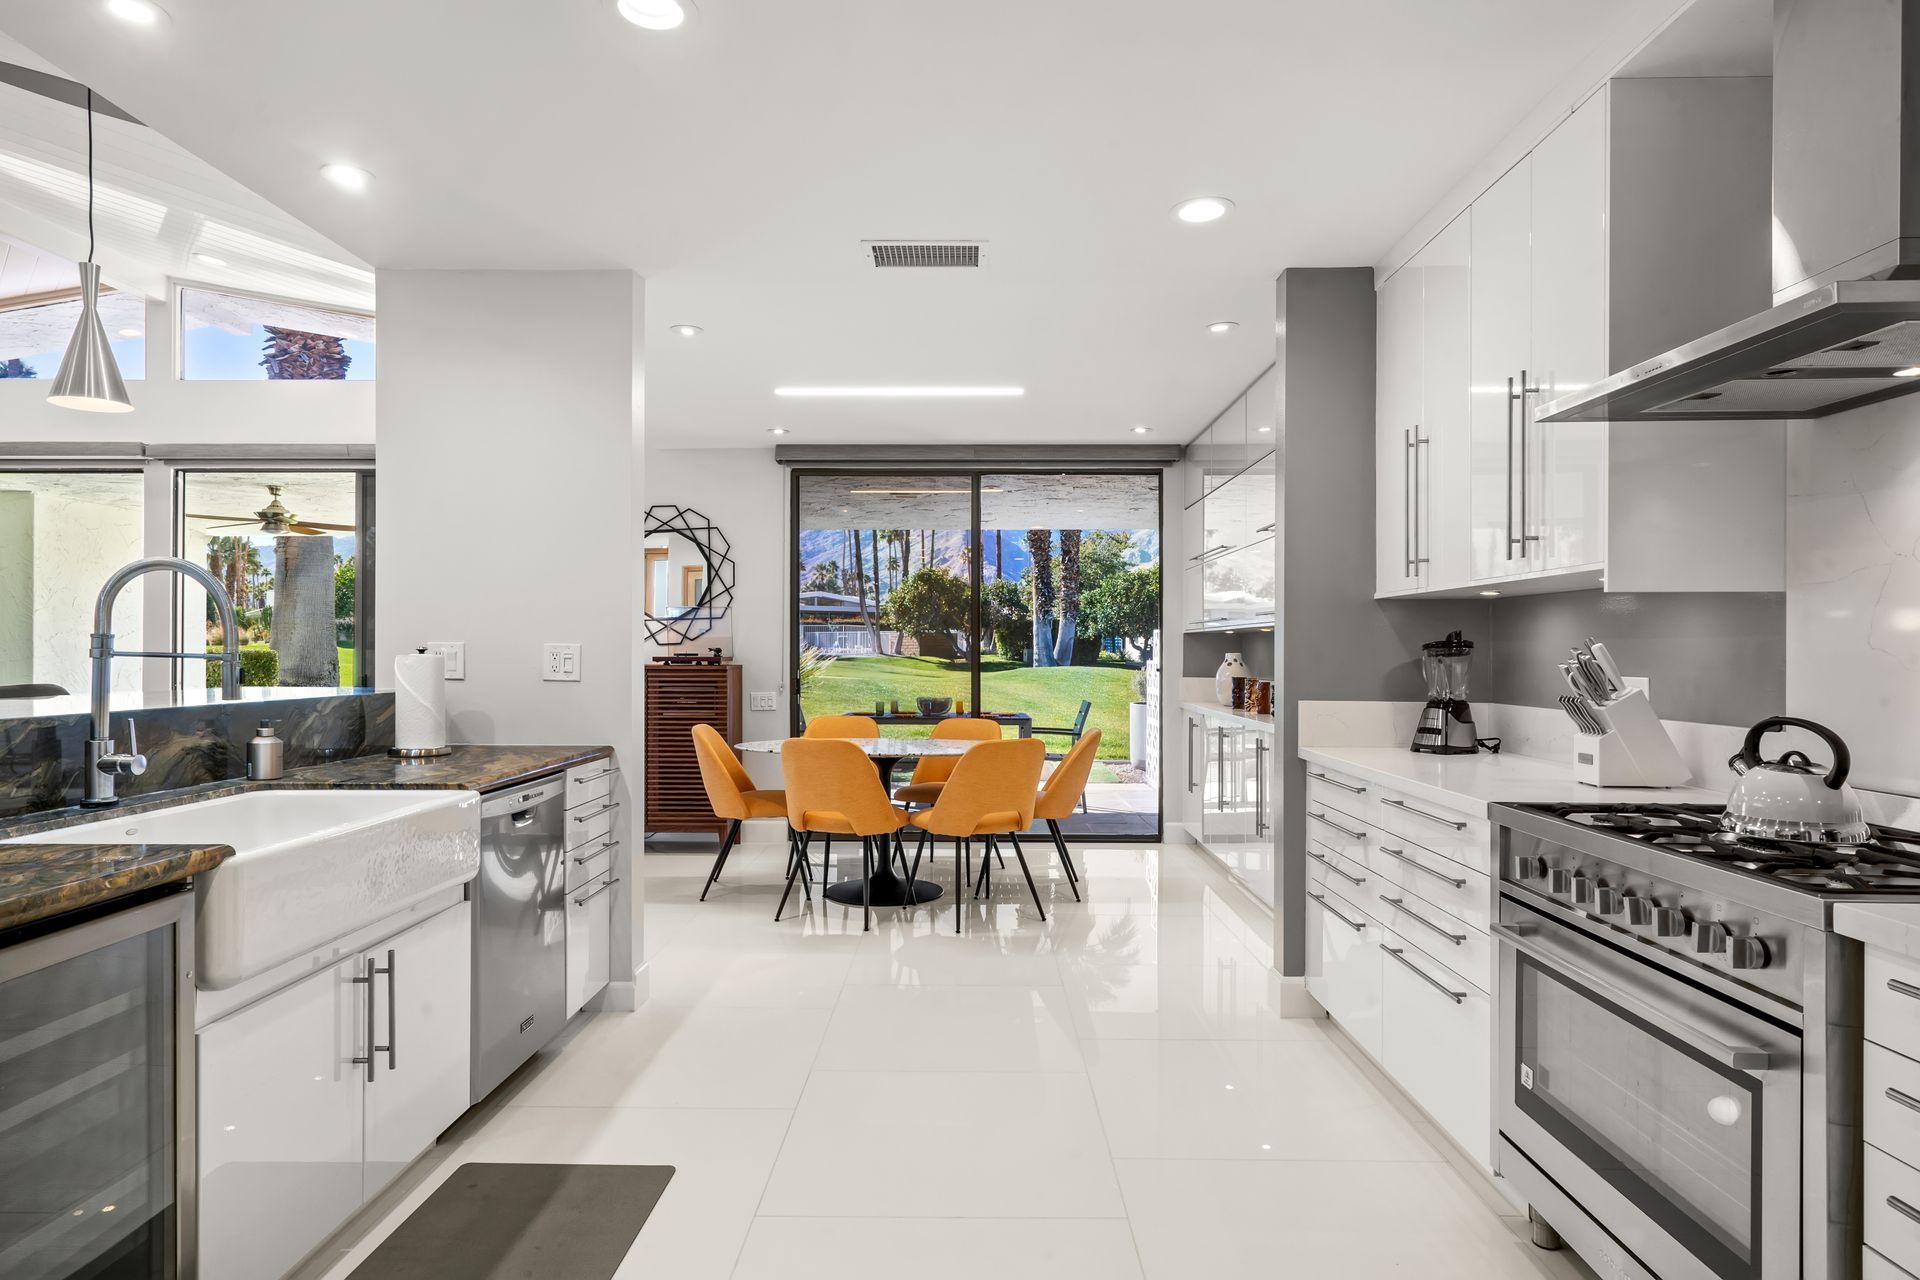 a kitchen with white cabinets and stainless steel appliances and a dining room in the background